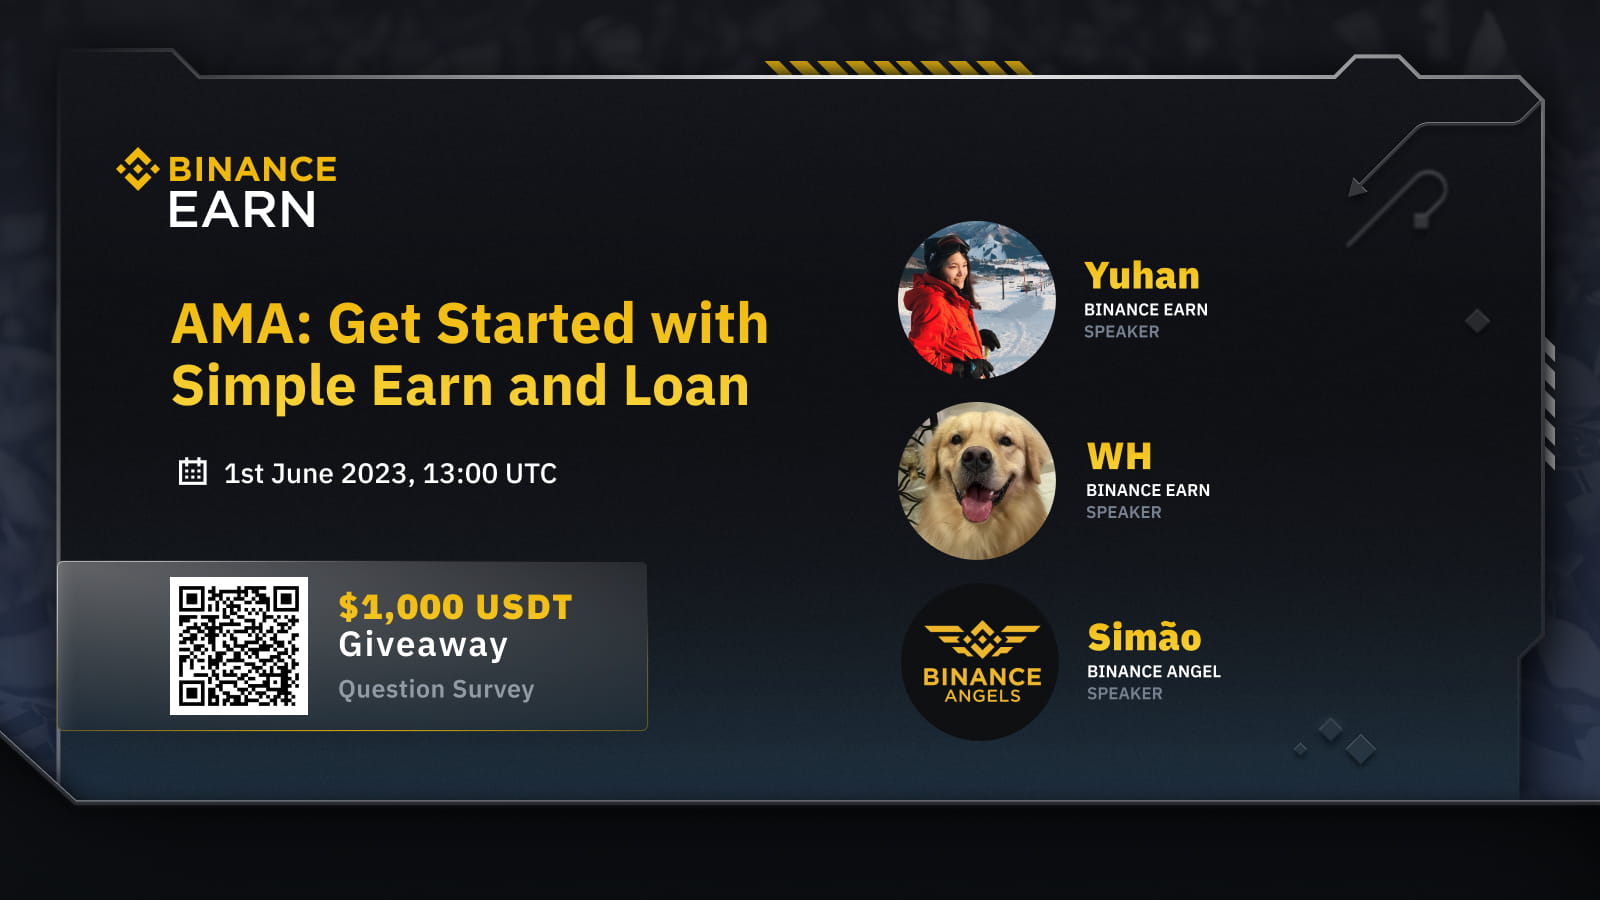 AMA: Get Started with Binance Simple Earn and Loan 